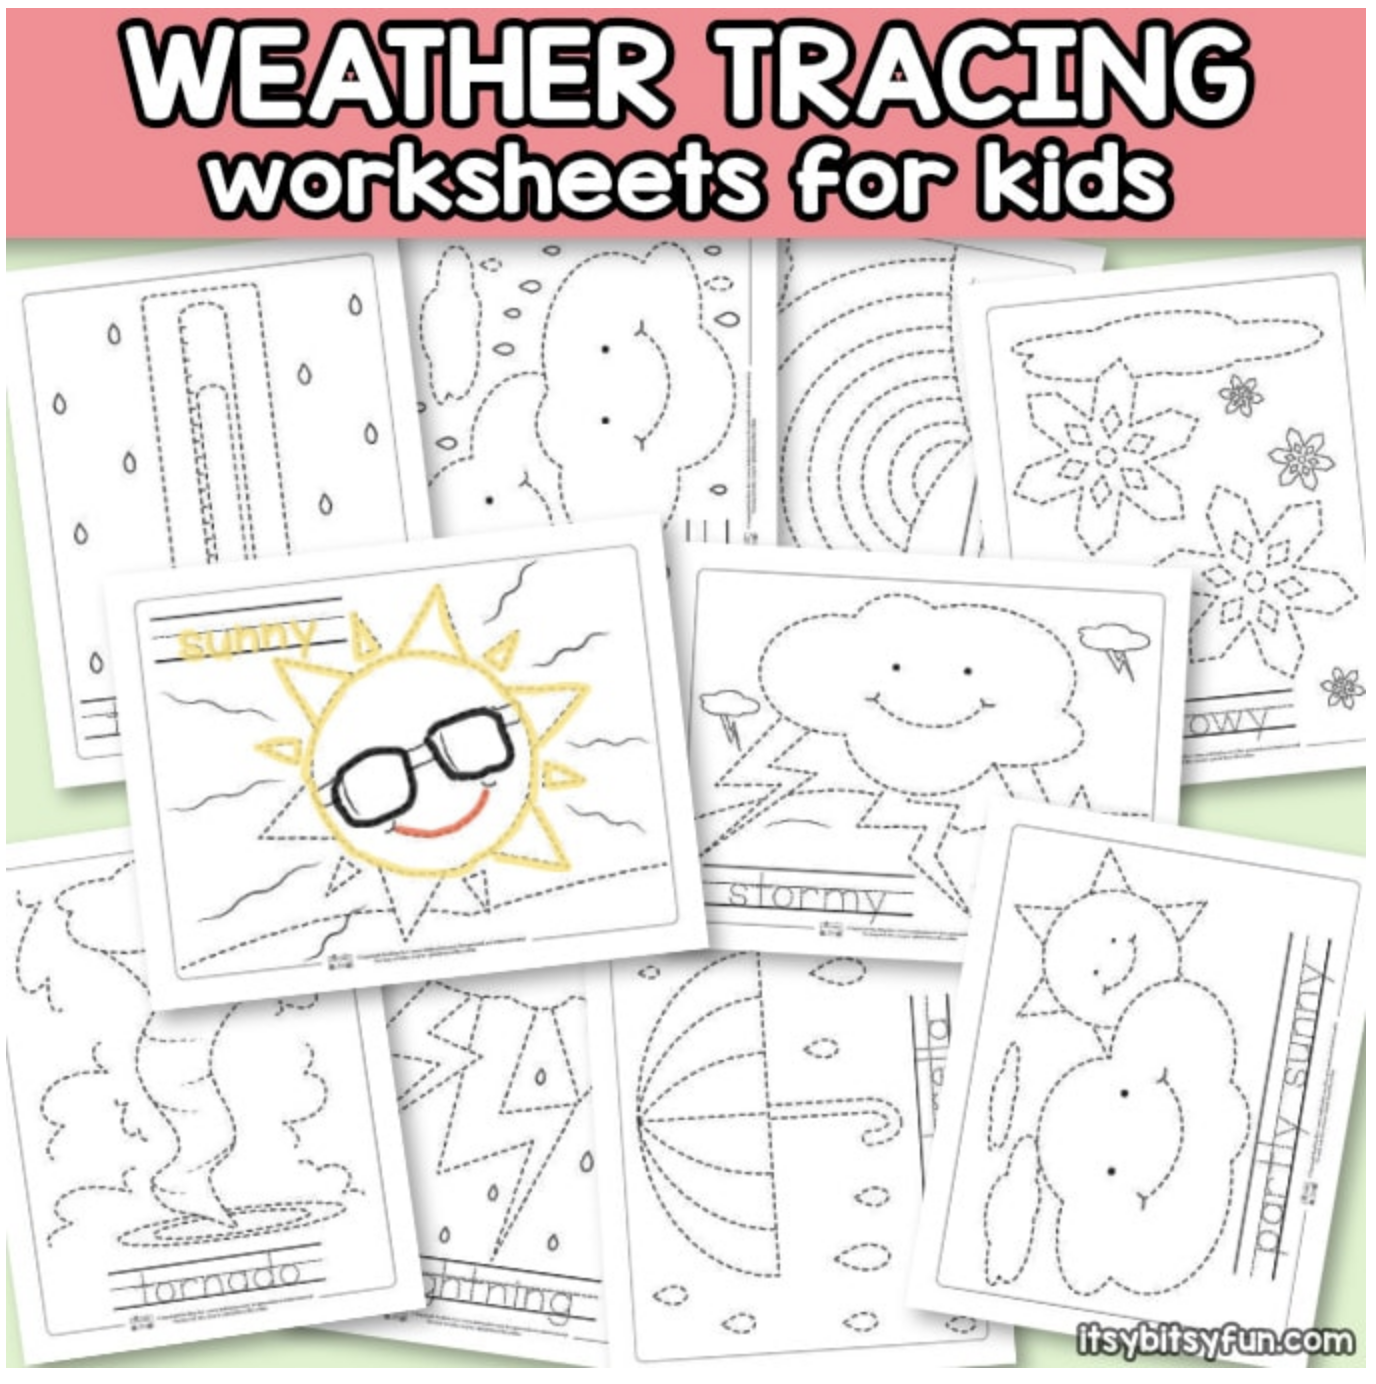 WEATHER TRACING WORKSHEETS